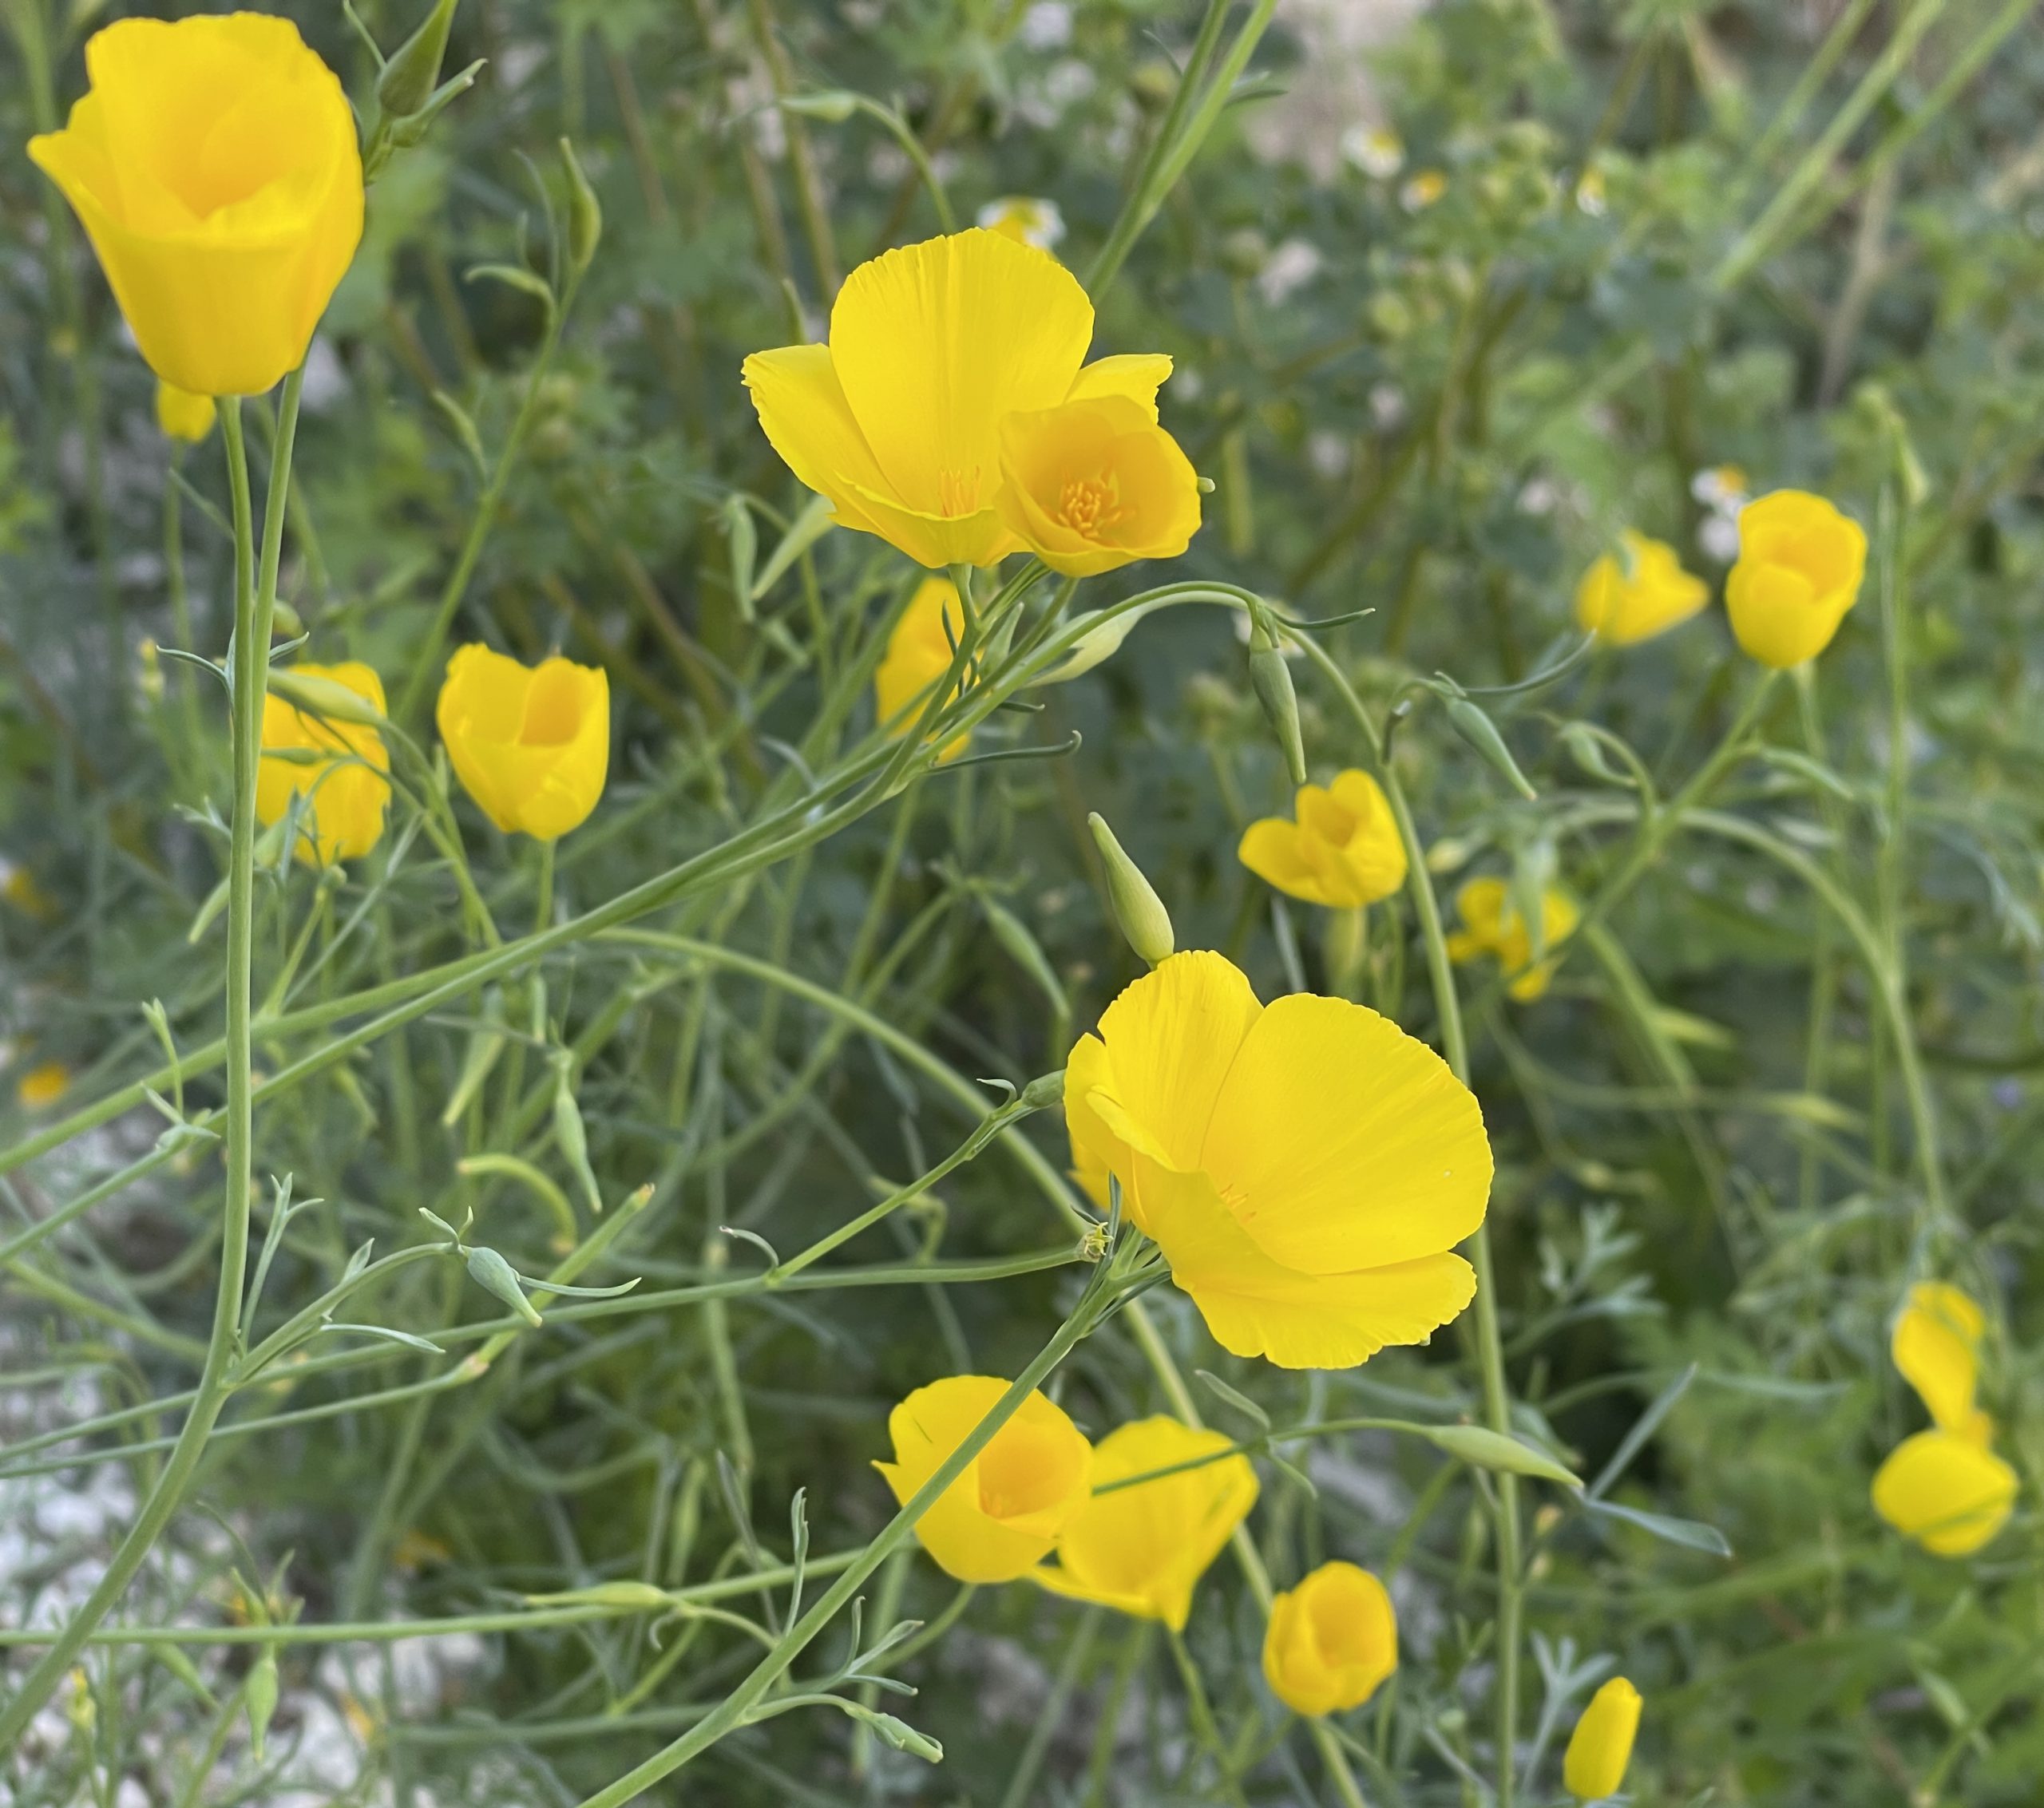 Searching For Valentine’s Day Wildflowers in Anza Borrego